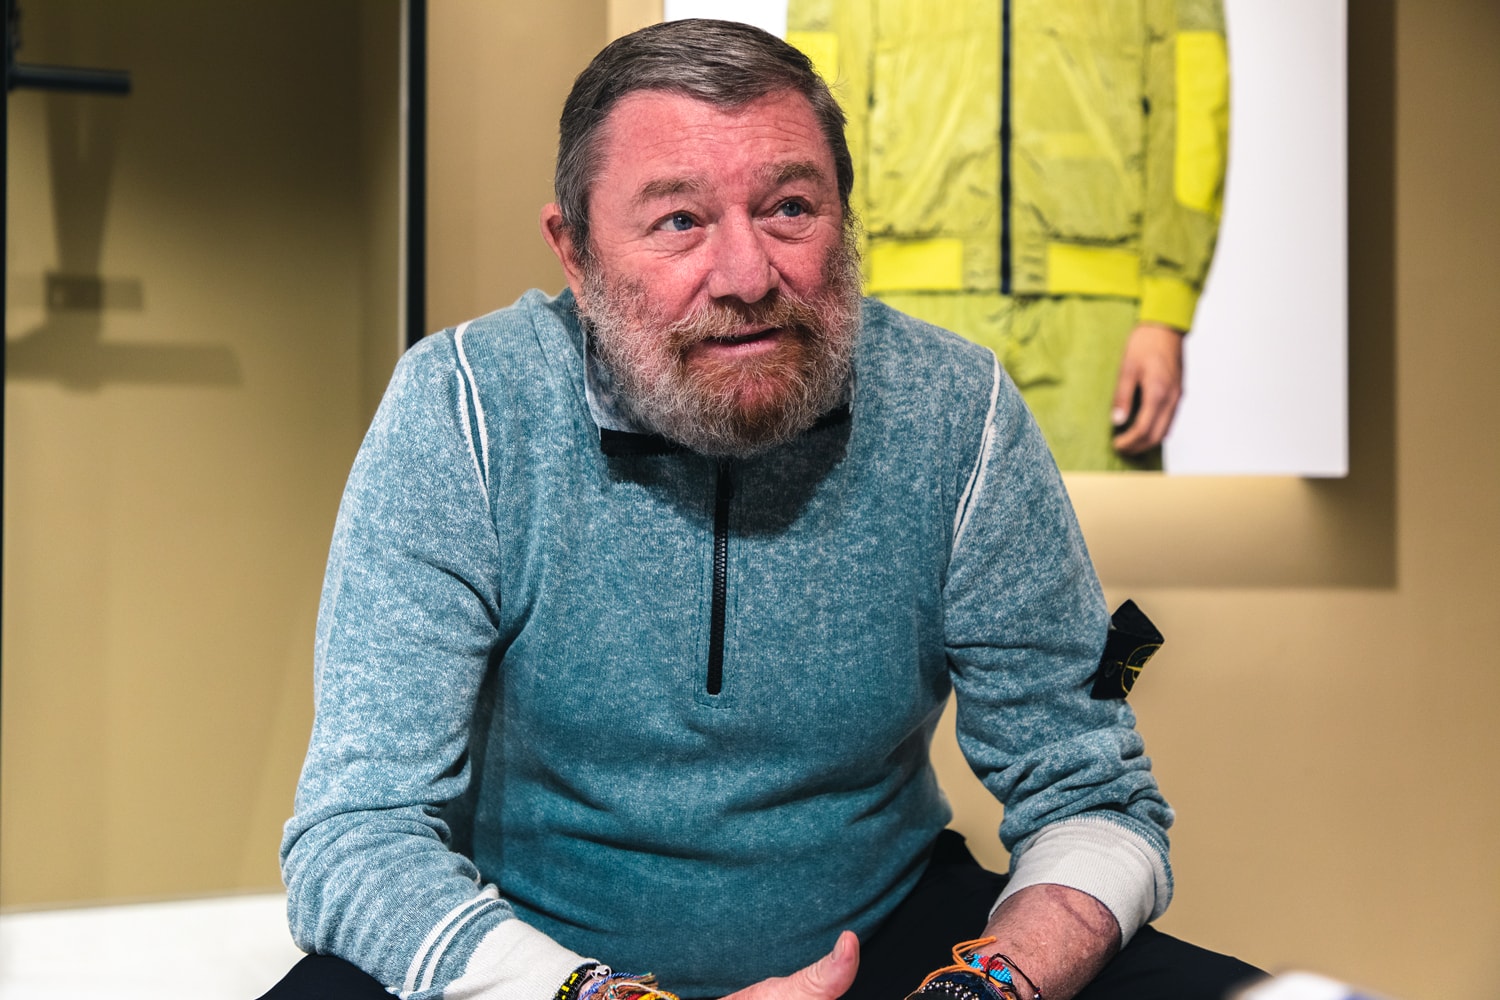 Carlo Rivetti Stone Island Full Interview hong kong store opening asia expansion italian italy brand fashion industrial design high end performance innovation design research materials garments drake supreme Massimo Osti rolex outdoors sandwich club street movement youth culture hong kong retail 